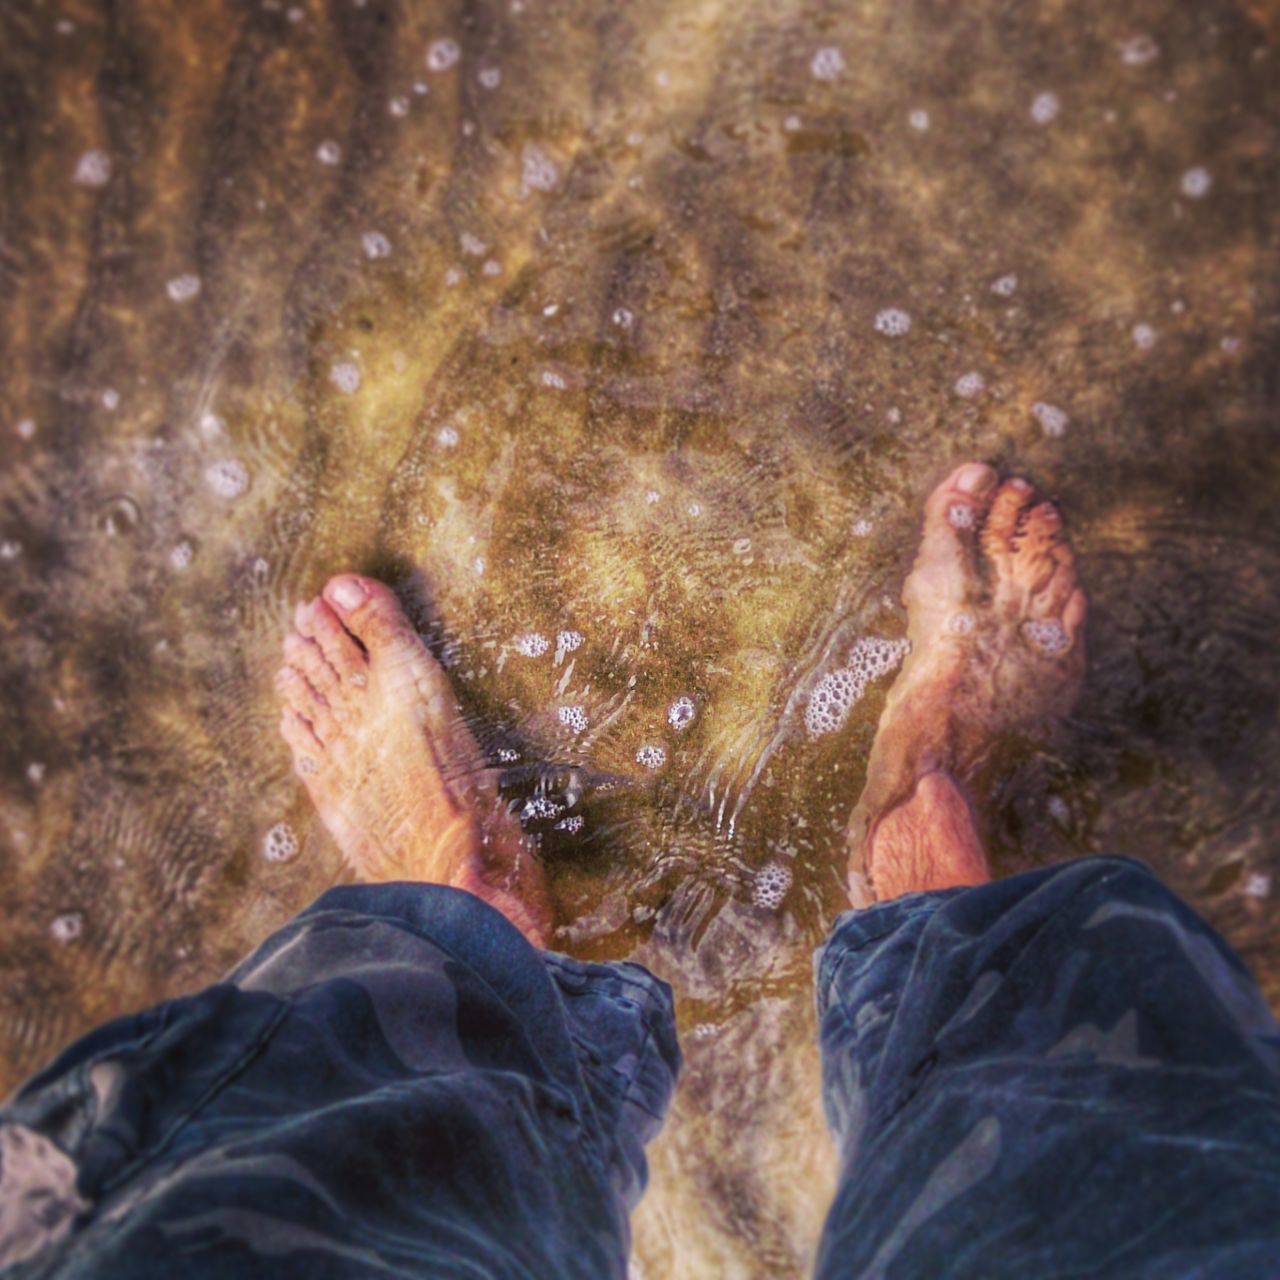 water, low section, person, lifestyles, leisure activity, personal perspective, men, high angle view, standing, human foot, lake, barefoot, relaxation, nature, shoe, wet, outdoors